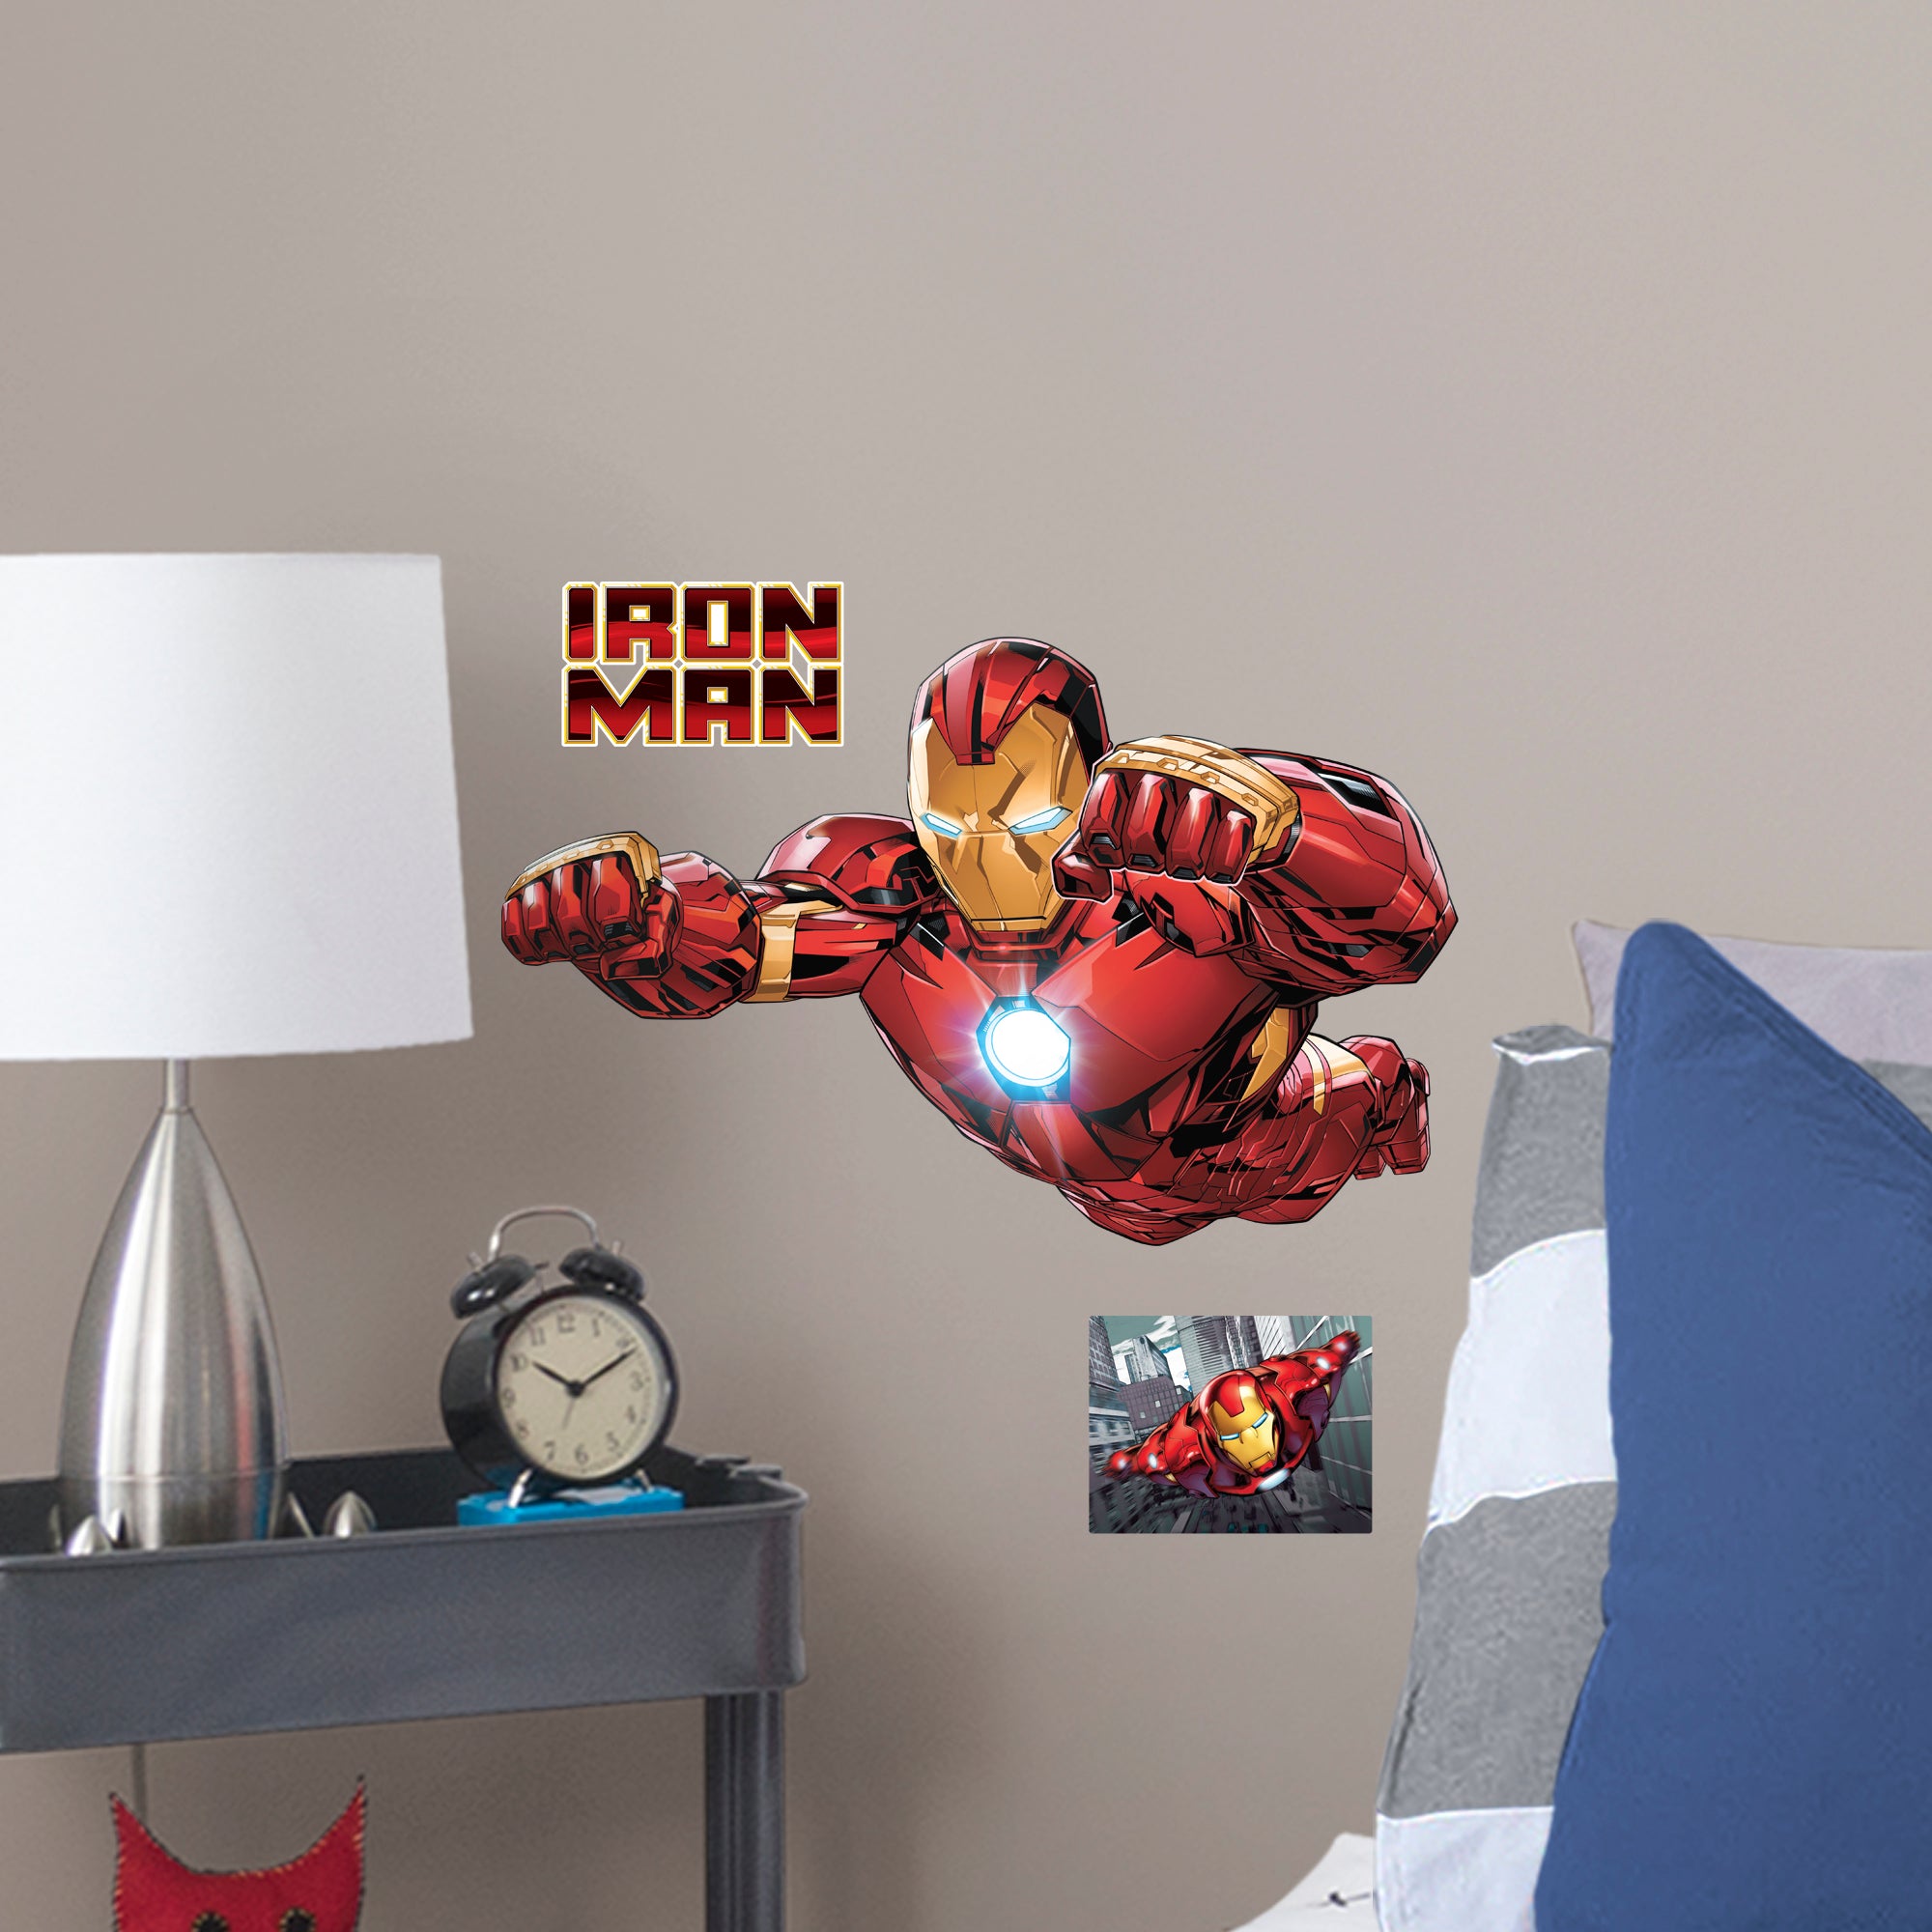 Iron Man: Avengers Core Flying - Officially Licensed Removable Wall Decal Large by Fathead | Vinyl